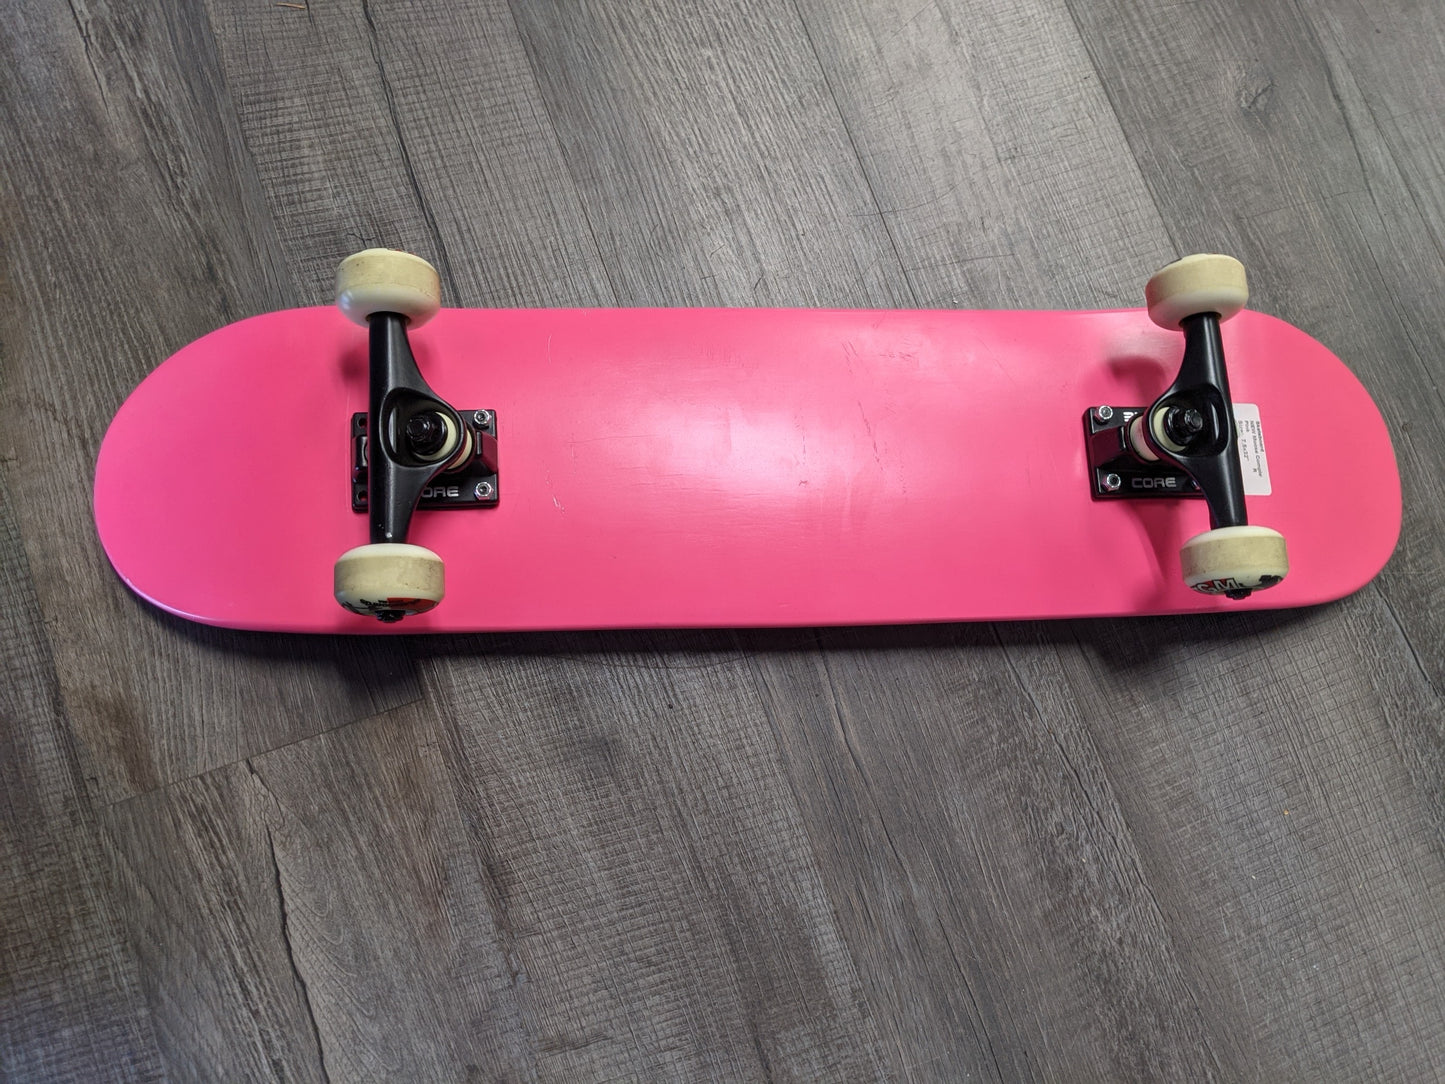 Moose Complete New Skateboard, Pink, Size: 7.5x32 In